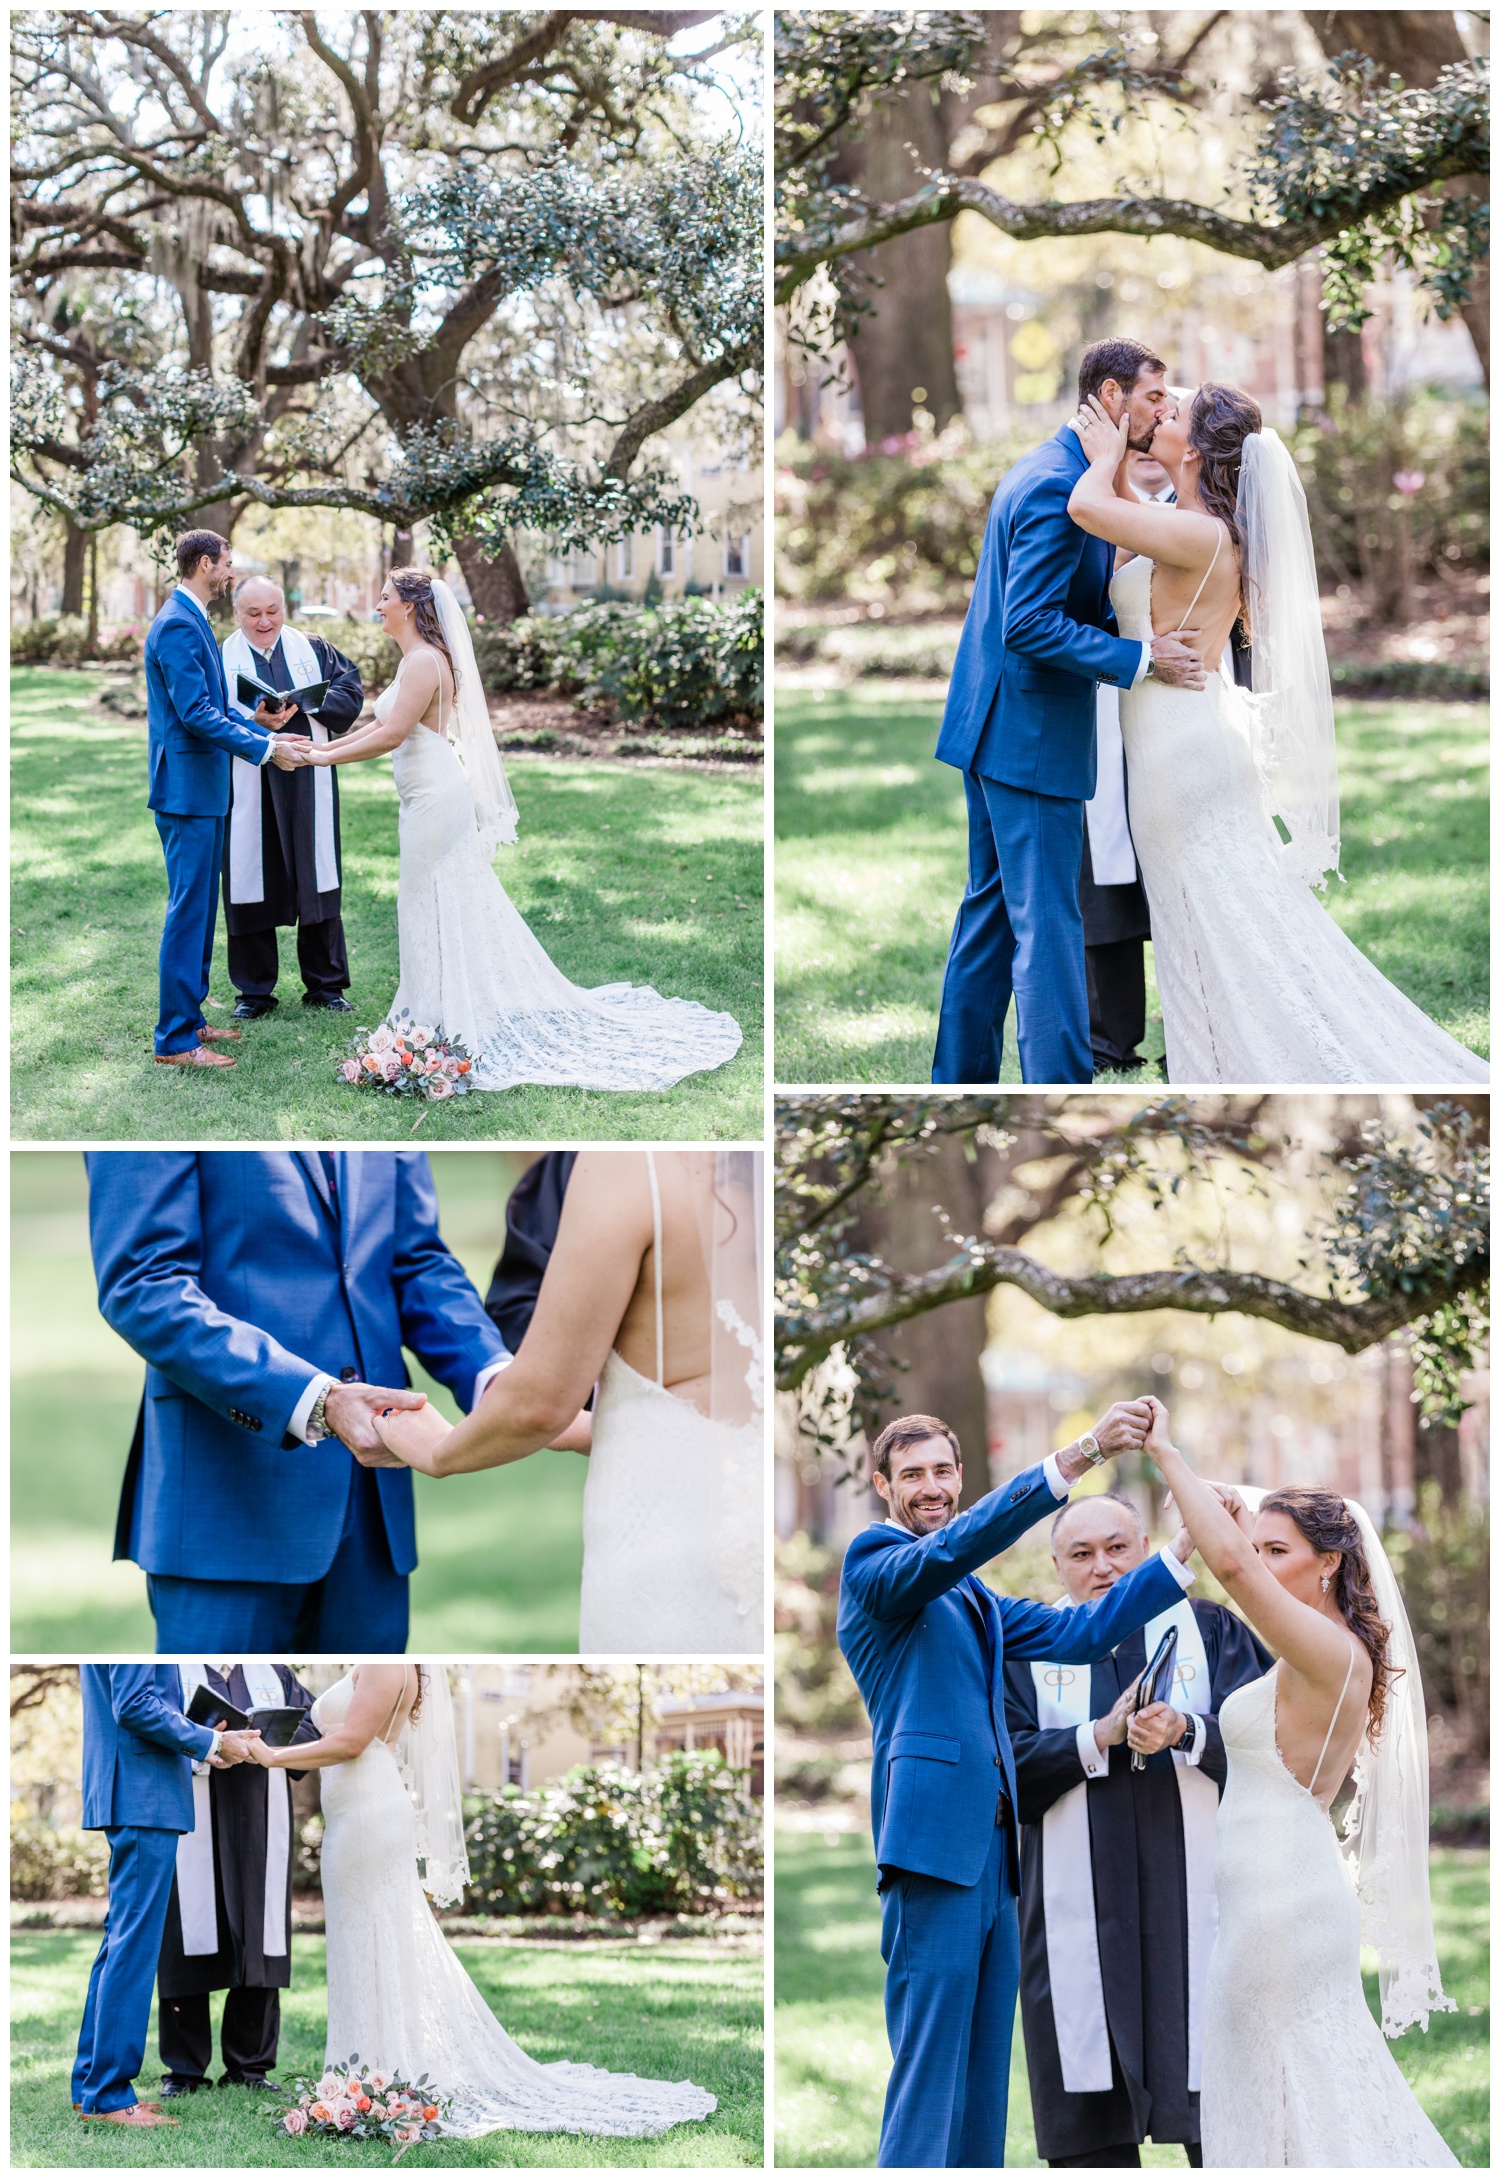 Elopement Under the Oaks - officiating by Revered Joe - the savannah elopement package